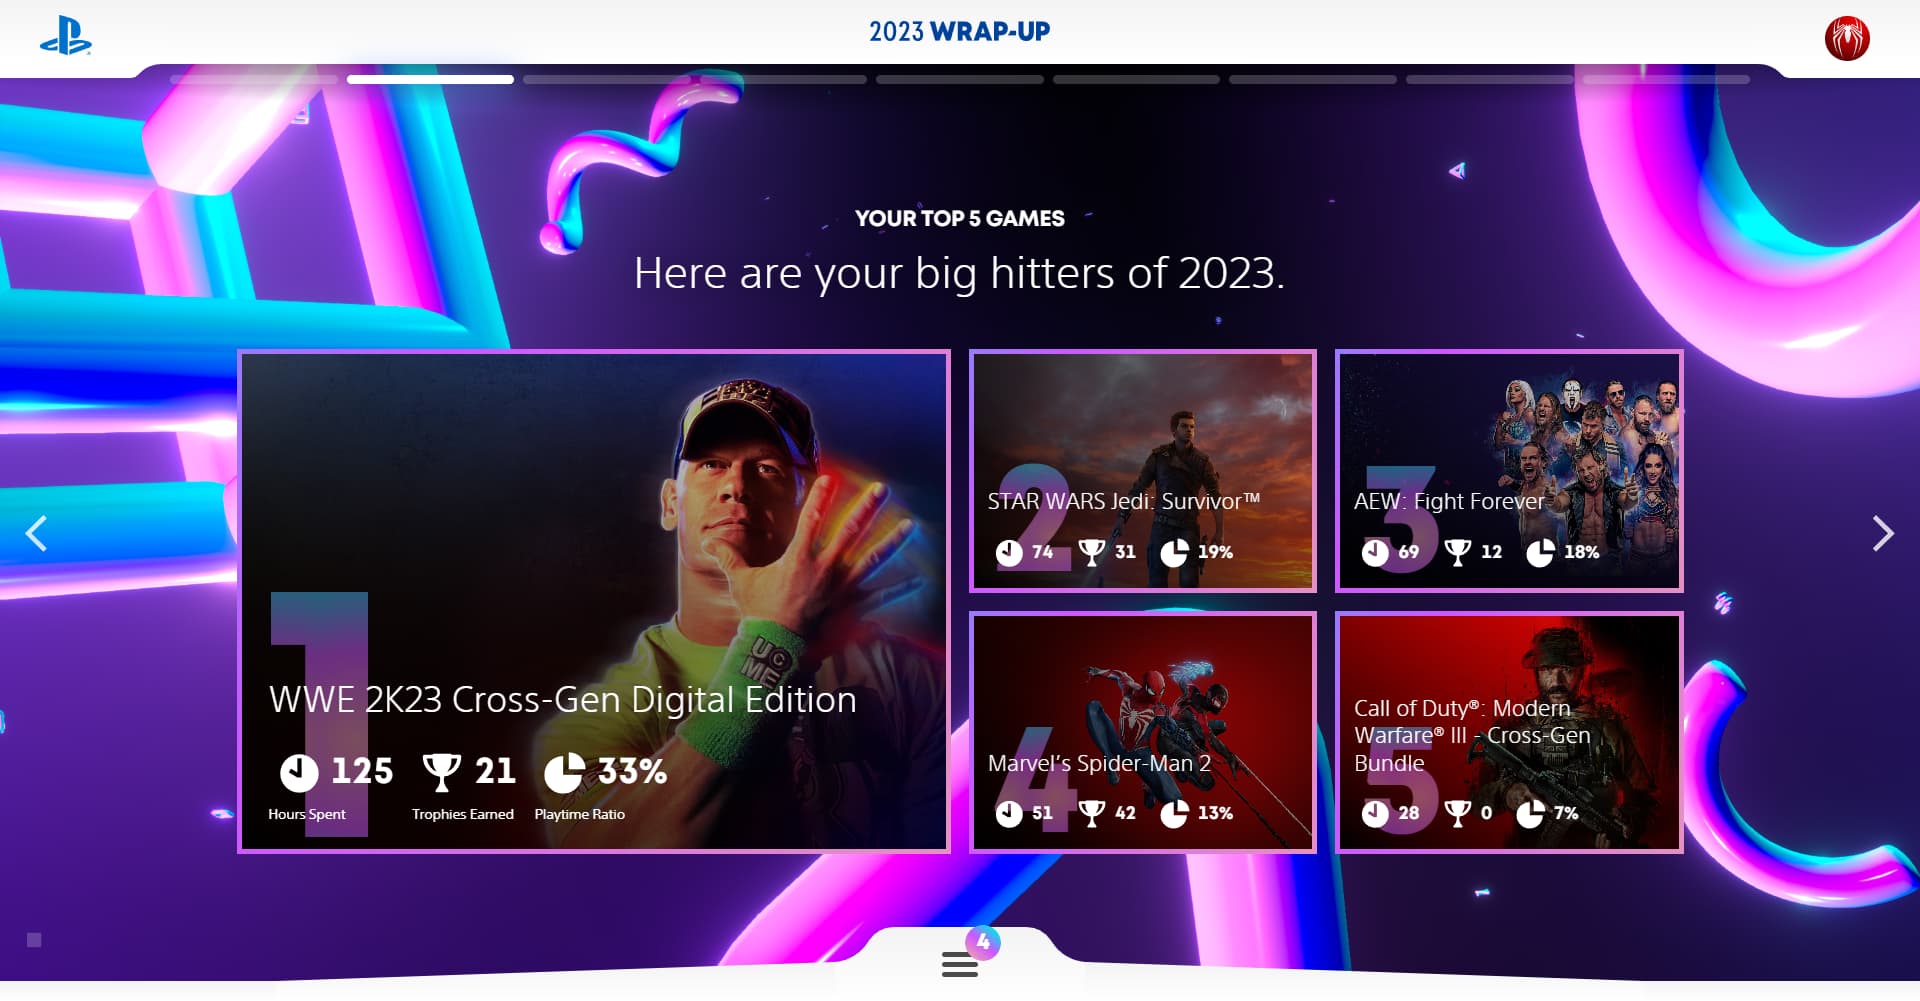 PlayStation Wrap-Up 2023 Is Finally Here: Check How To Create Yours - News18